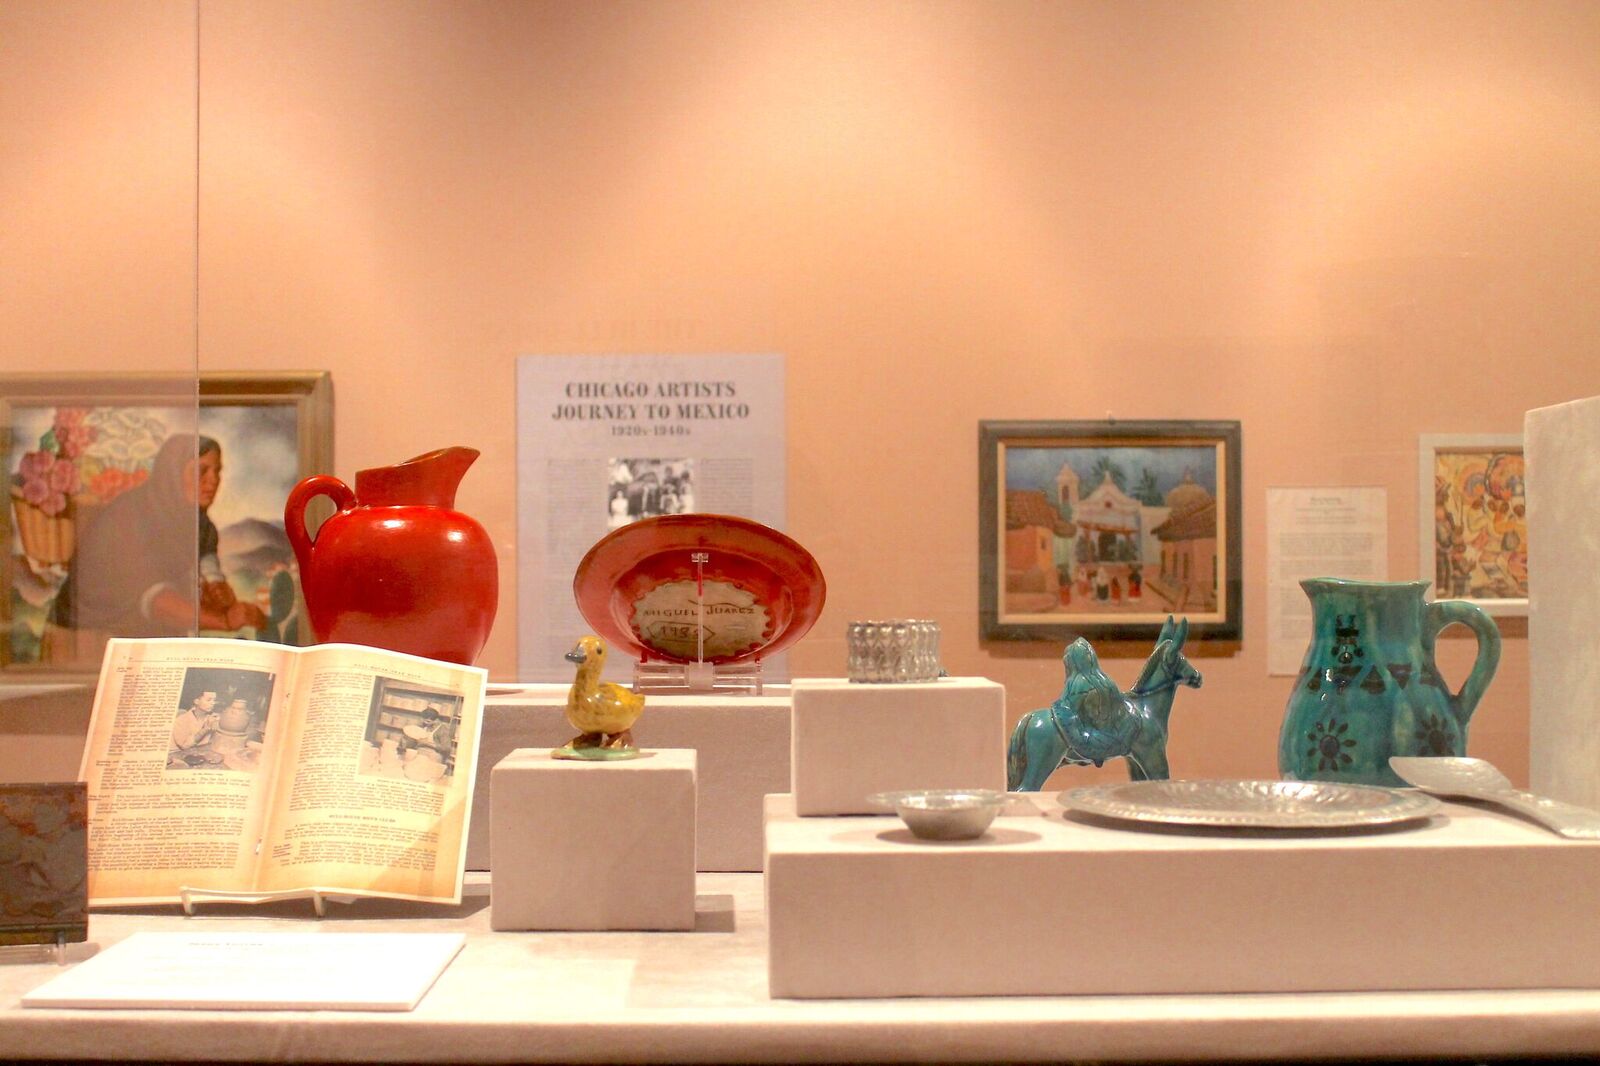 Detail of a glass case from the exhibition holding silver dishware, ceramic jugs, and ceramic sculptures — one a yellow duck and another a green religious sculpture of Joseph walking behind Mary on a donkey. In the background there is a painting of an indigenous Mexican woman carrying flowers on her back in a basket, four photographs of Mexican artesanos working, and wall text that reads “Chicago Artists Journey to Mexico.” Image by Jennifer Patiño Cervantes.